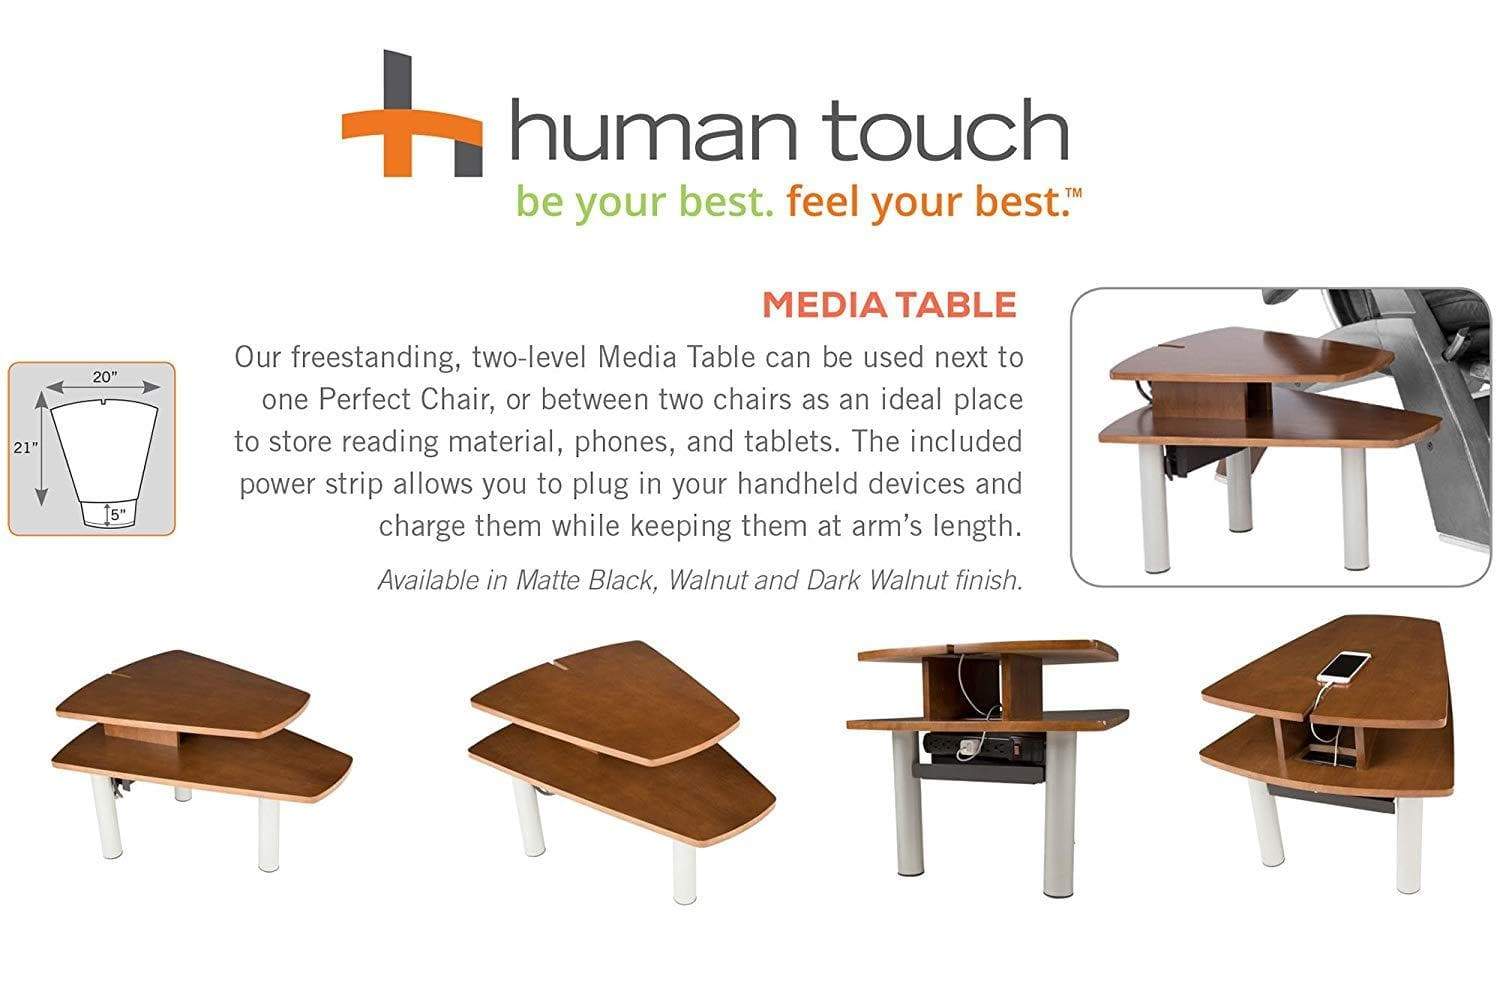 Human Touch Perfect Chair Free Standing Two Level Media Table - Open Box - Senior.com Recliner Accessories